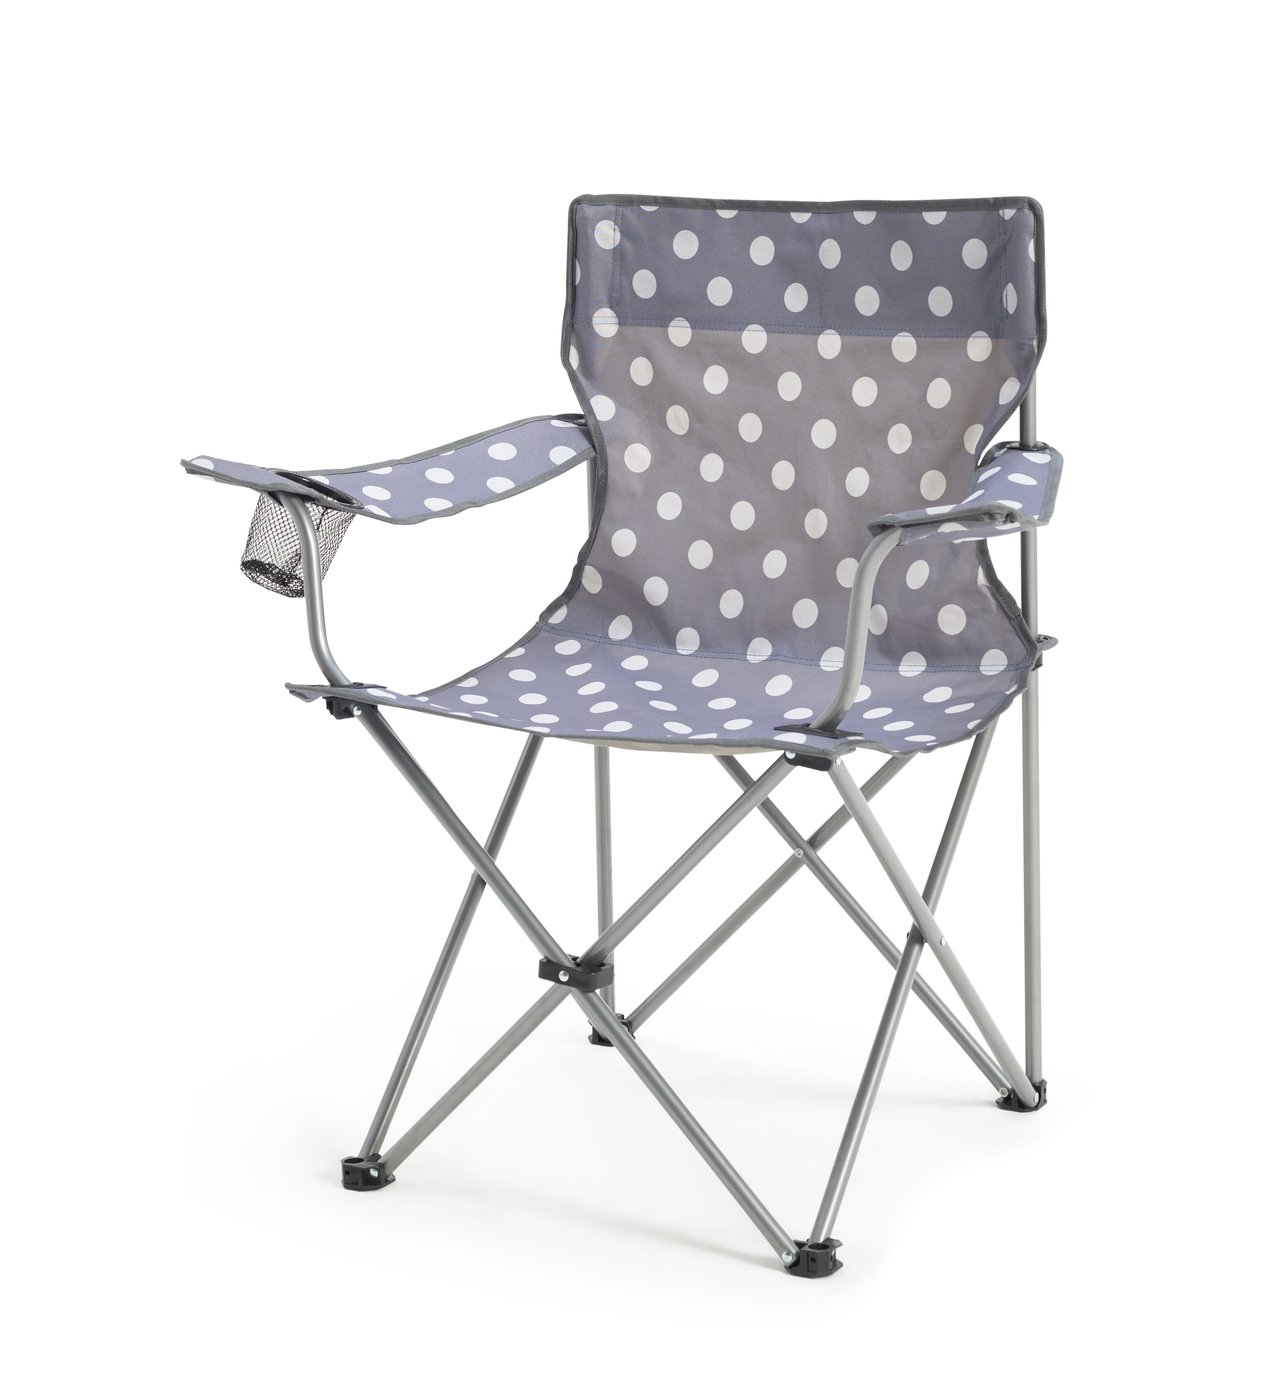 Pro Action Polka Dot Polyester Folding Camping Chair